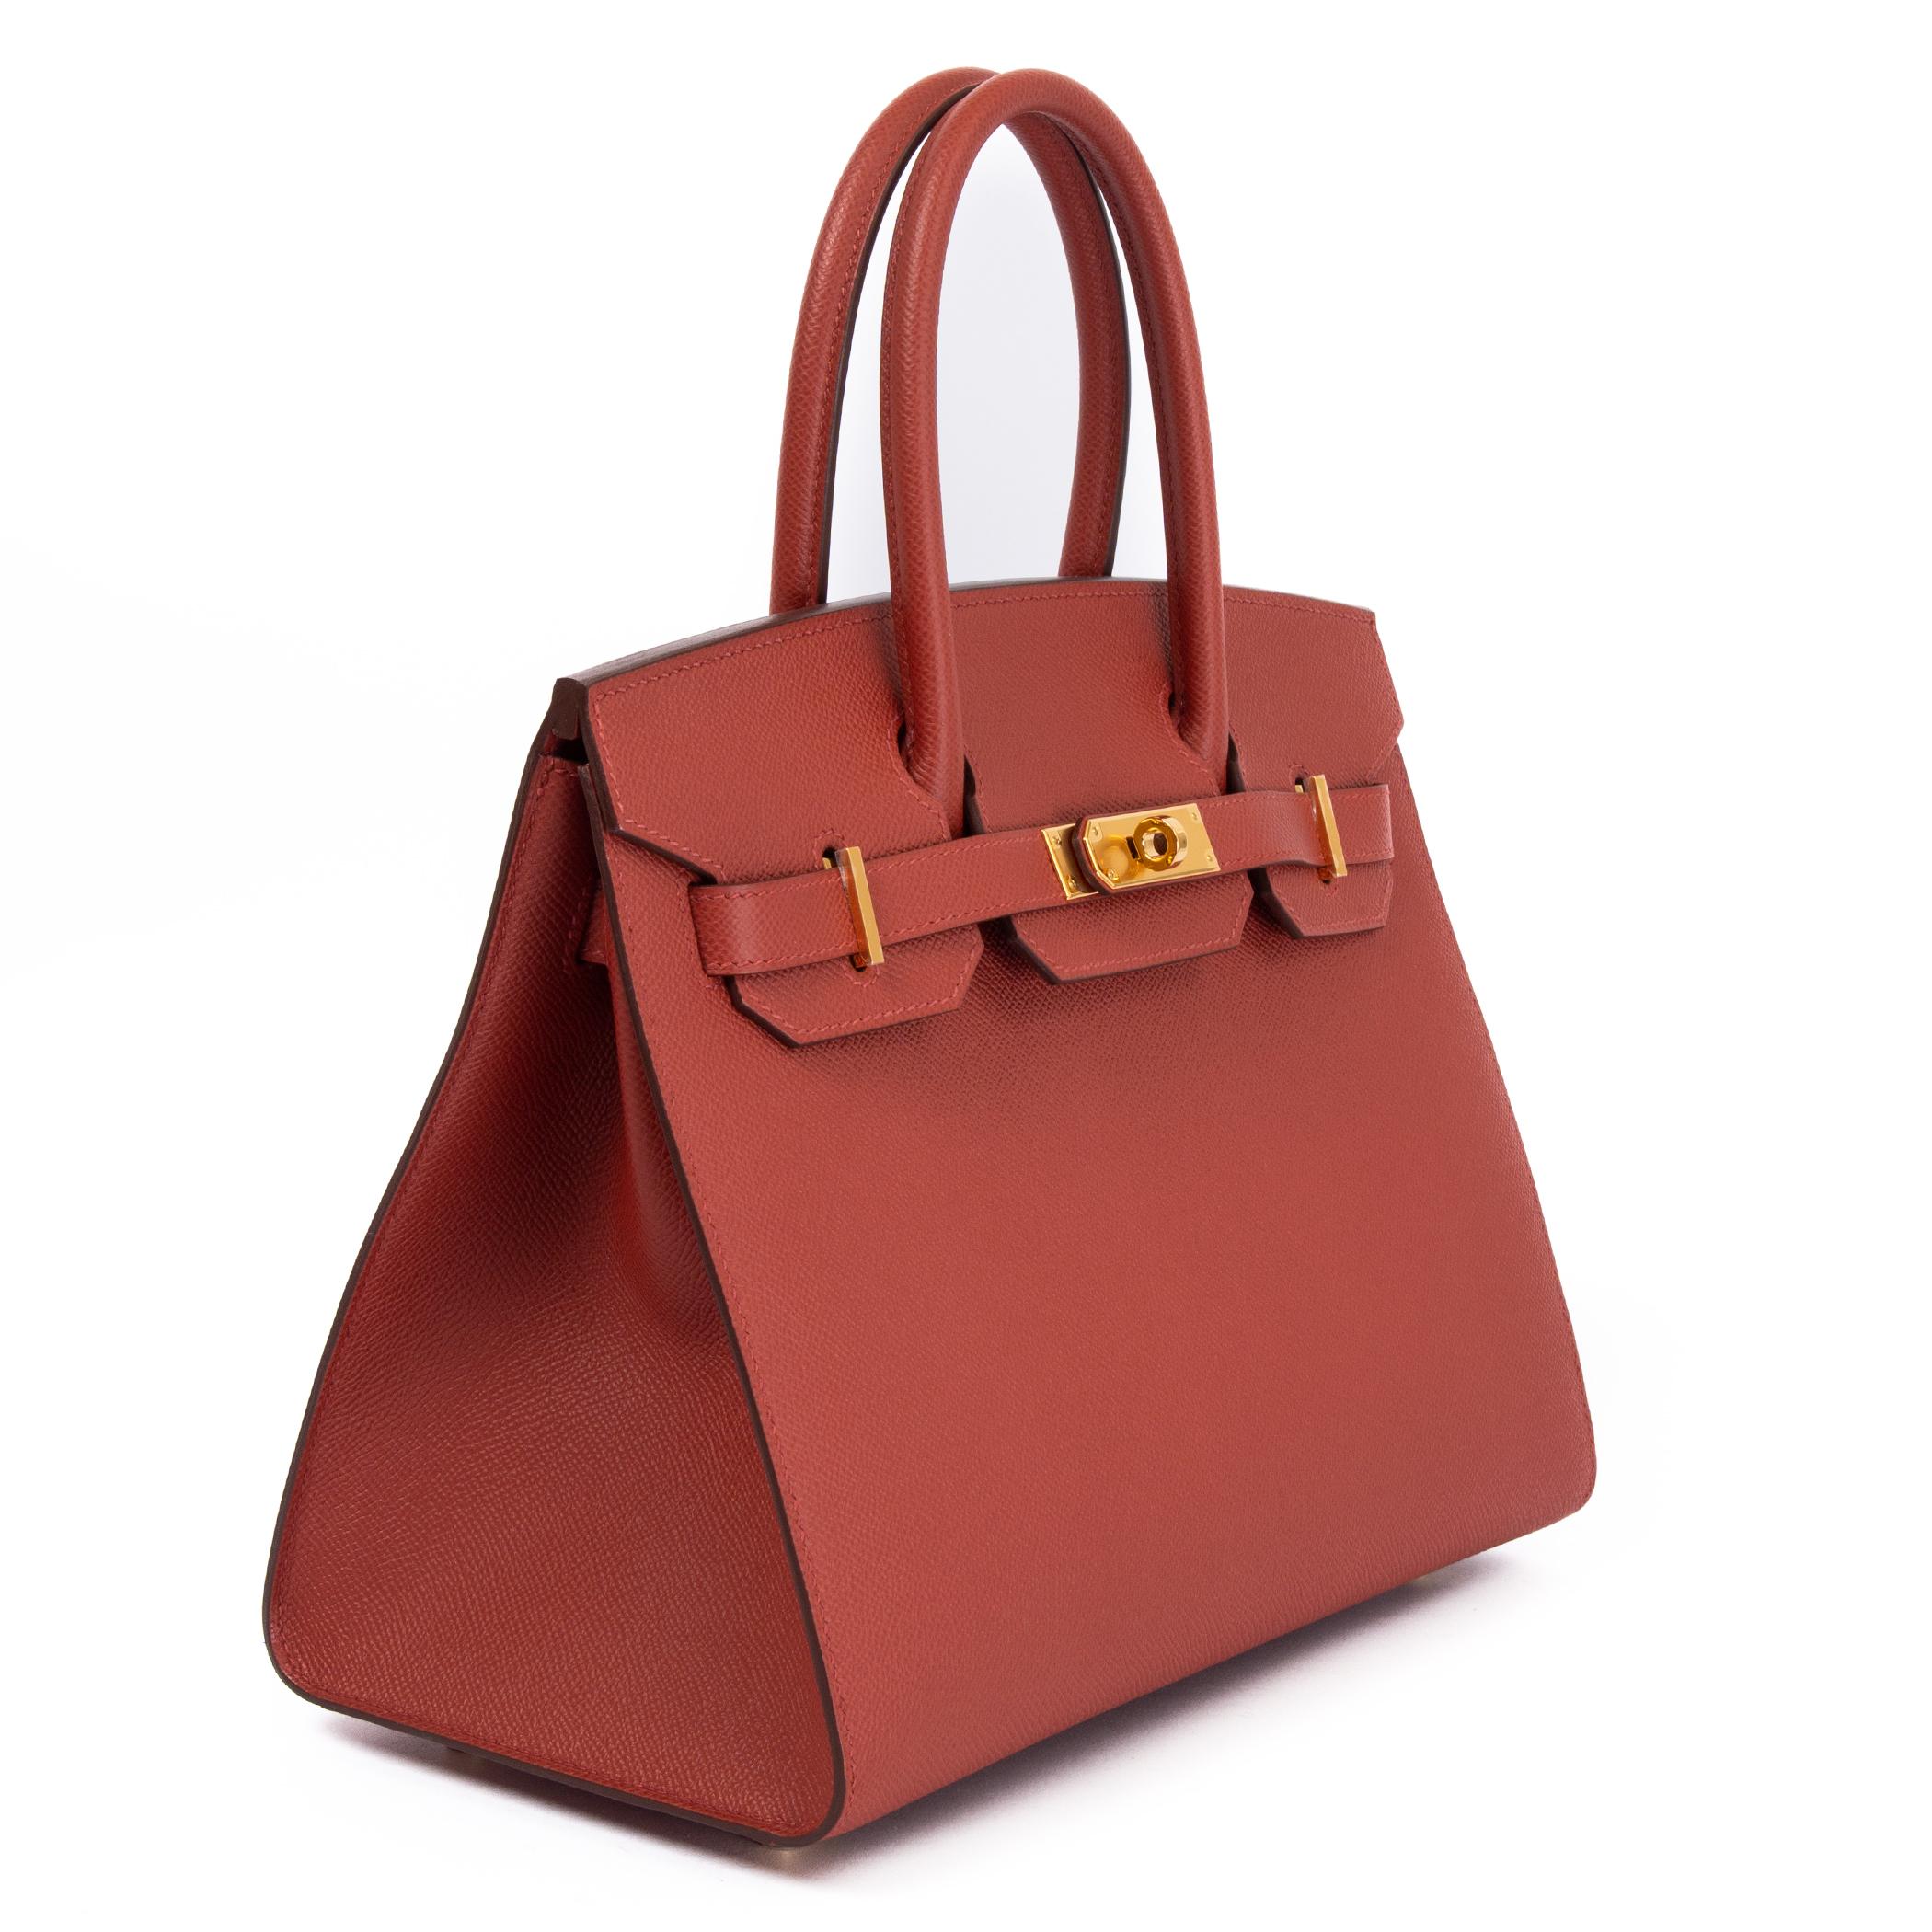 100% authentic Hermes Birkin 30 Sellier bag in Rouge Venitien Epsom leather with gold-plated hardware. Lined in Chevre (goat skin) with an open pocket against the front and a zipper pocket against the back. Brand new - Full